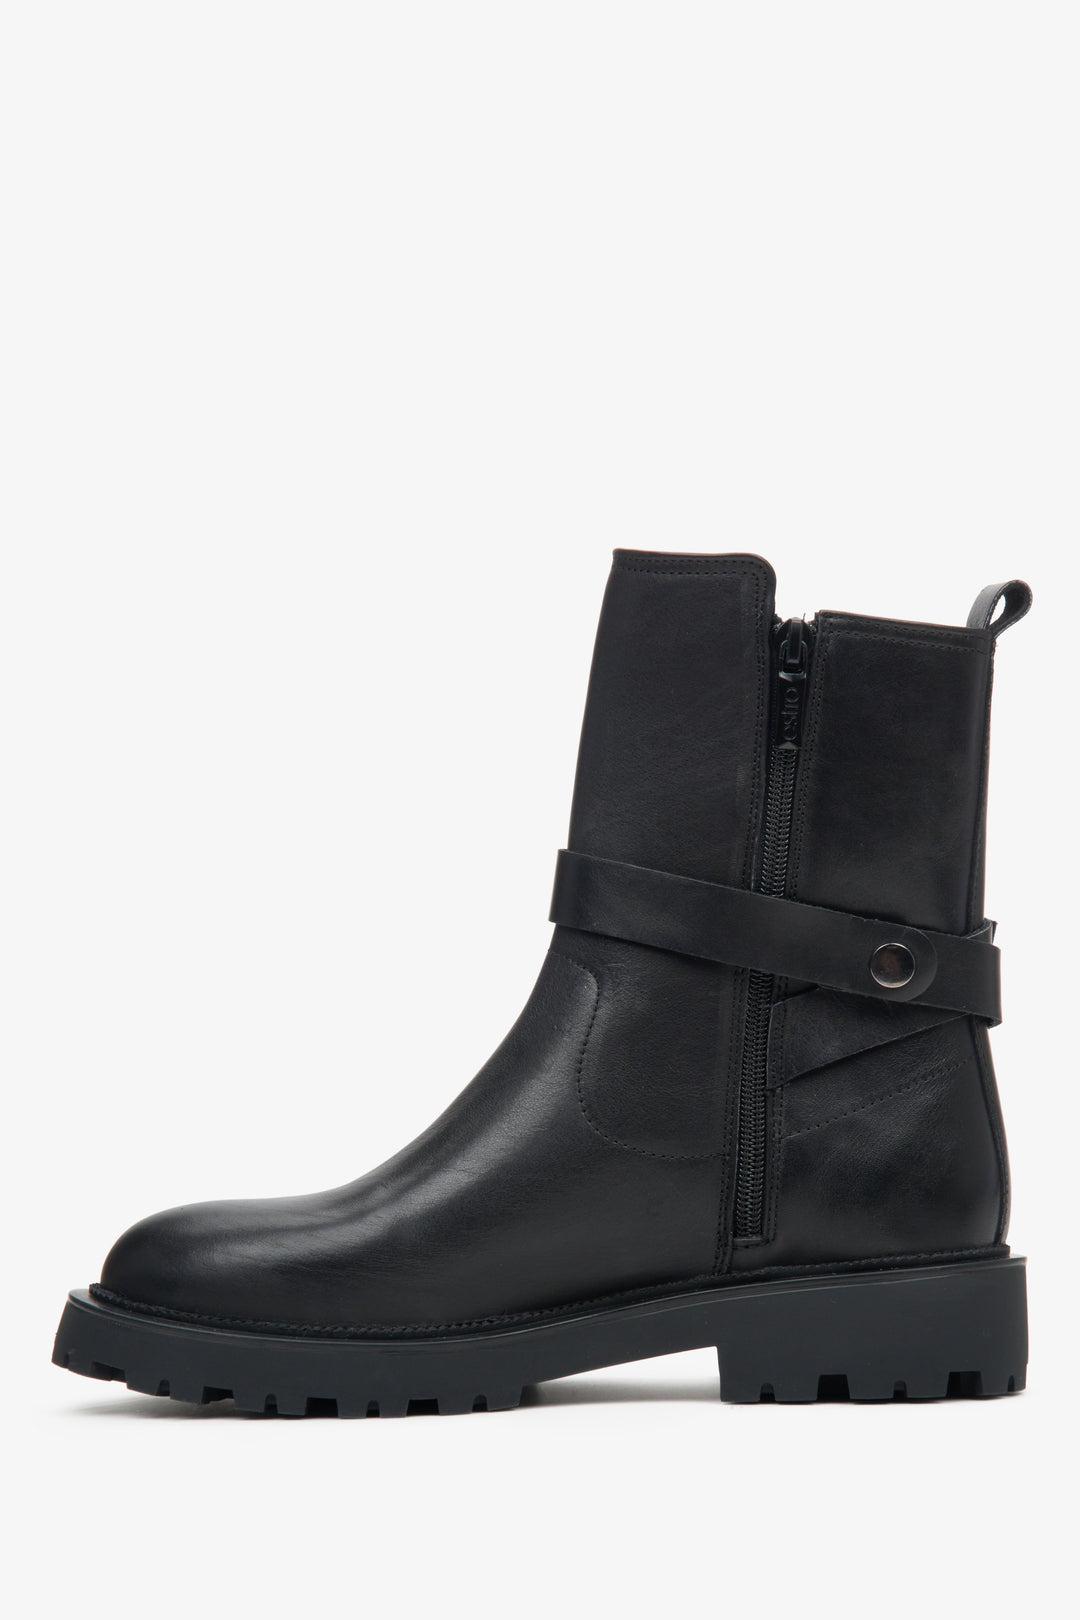 Women's black Estro ankle boots with soft natural leather uppers - shoe profile.